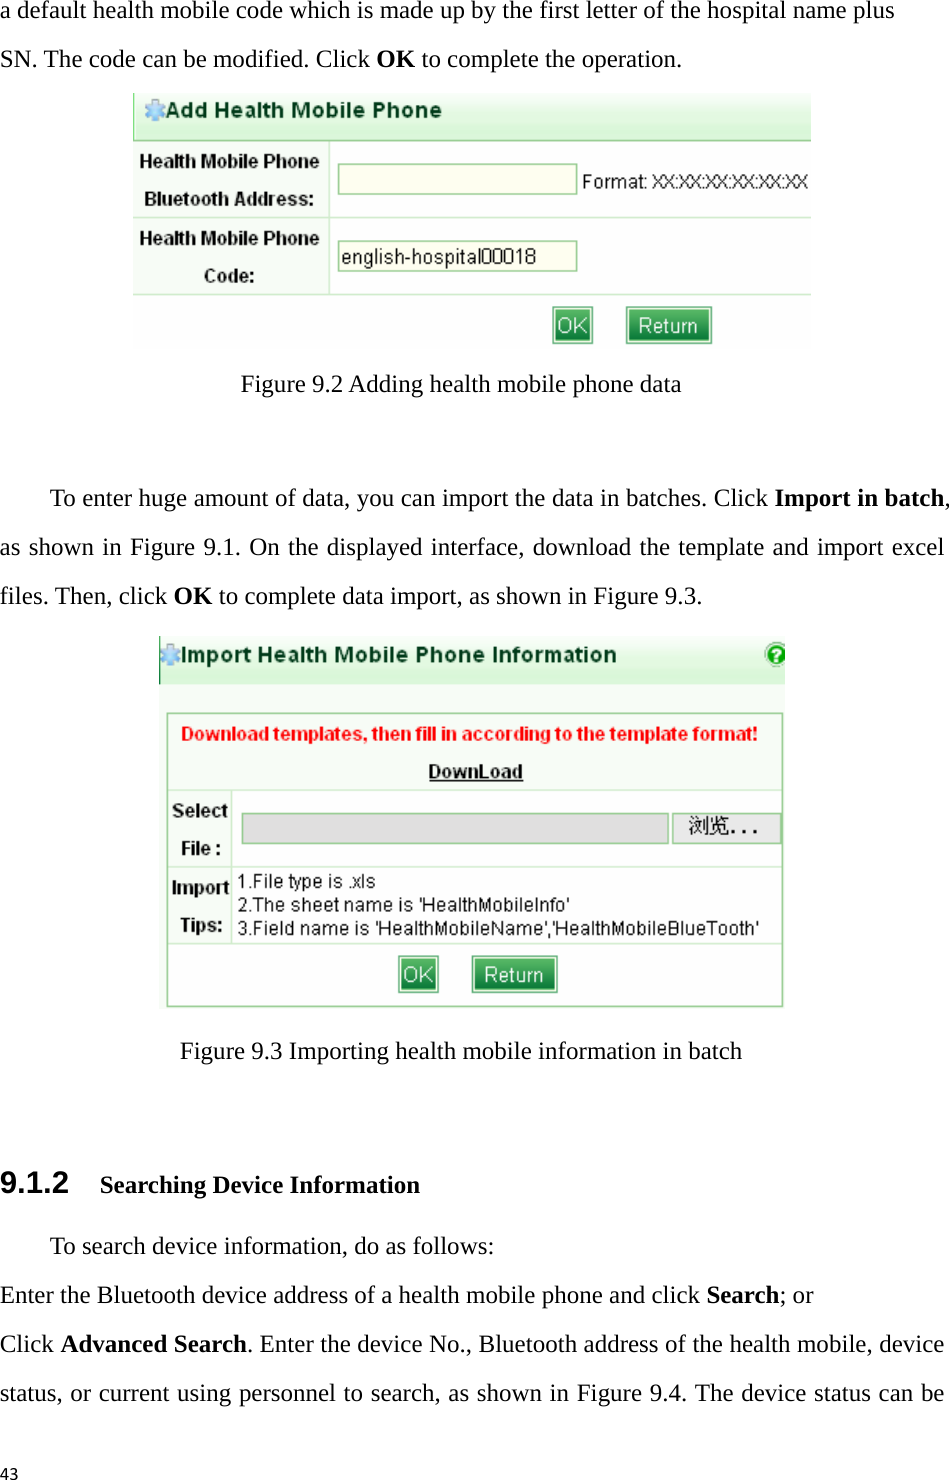 43a default health mobile code which is made up by the first letter of the hospital name plus SN. The code can be modified. Click OK to complete the operation.    Figure 9.2 Adding health mobile phone data    To enter huge amount of data, you can import the data in batches. Click Import in batch, as shown in Figure 9.1. On the displayed interface, download the template and import excel files. Then, click OK to complete data import, as shown in Figure 9.3.    Figure 9.3 Importing health mobile information in batch  9.1.2    Searching Device Information To search device information, do as follows: Enter the Bluetooth device address of a health mobile phone and click Search; or Click Advanced Search. Enter the device No., Bluetooth address of the health mobile, device status, or current using personnel to search, as shown in Figure 9.4. The device status can be 